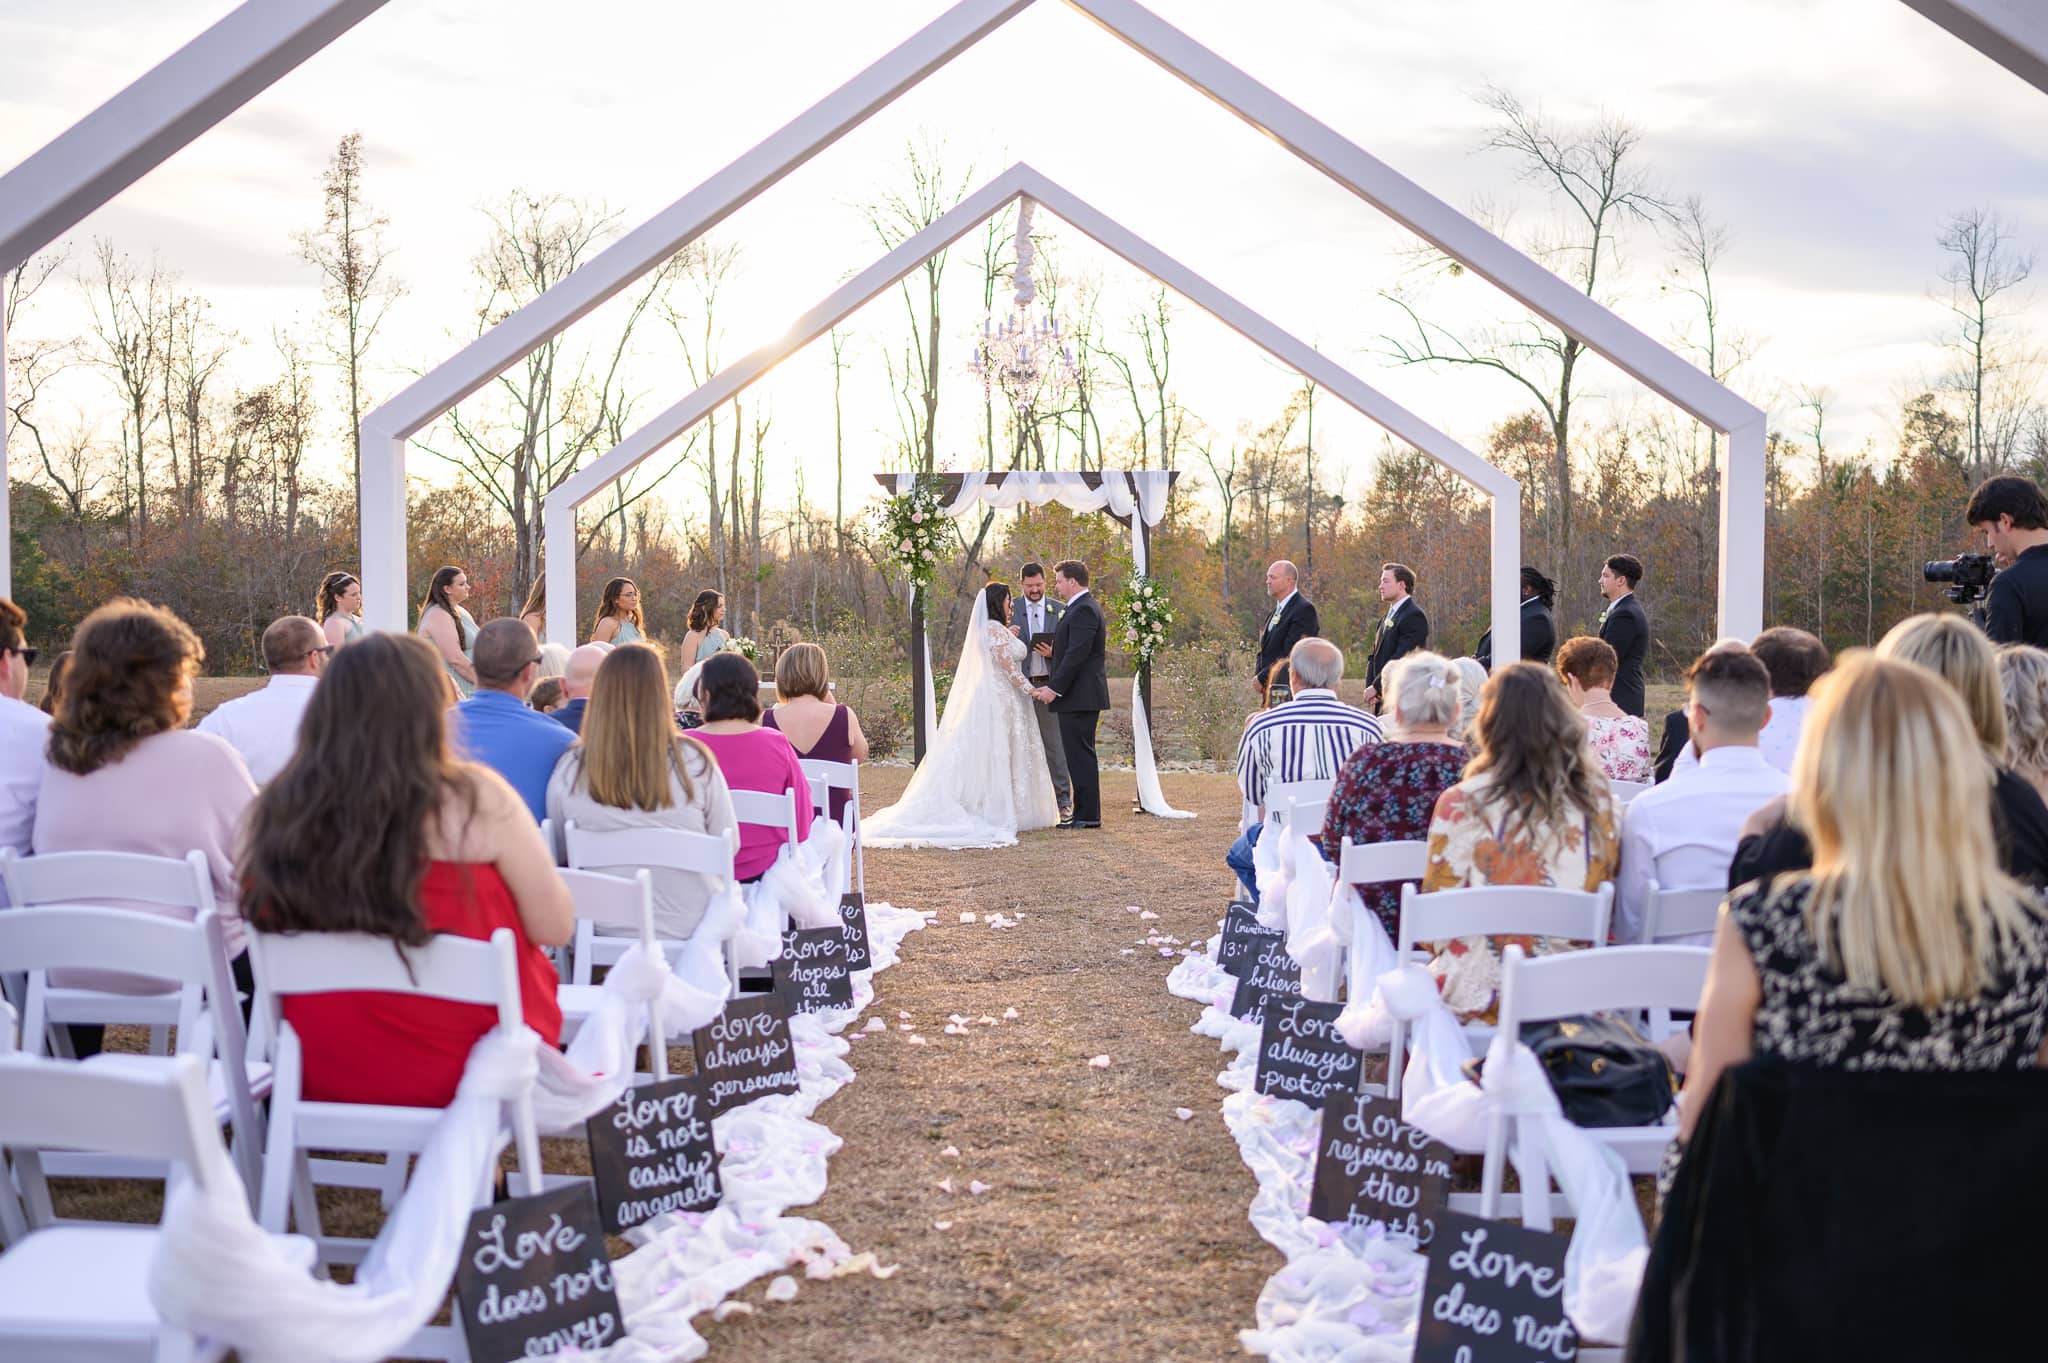 Wedding ceremony in the sunset - The Venue at White Oaks Farm